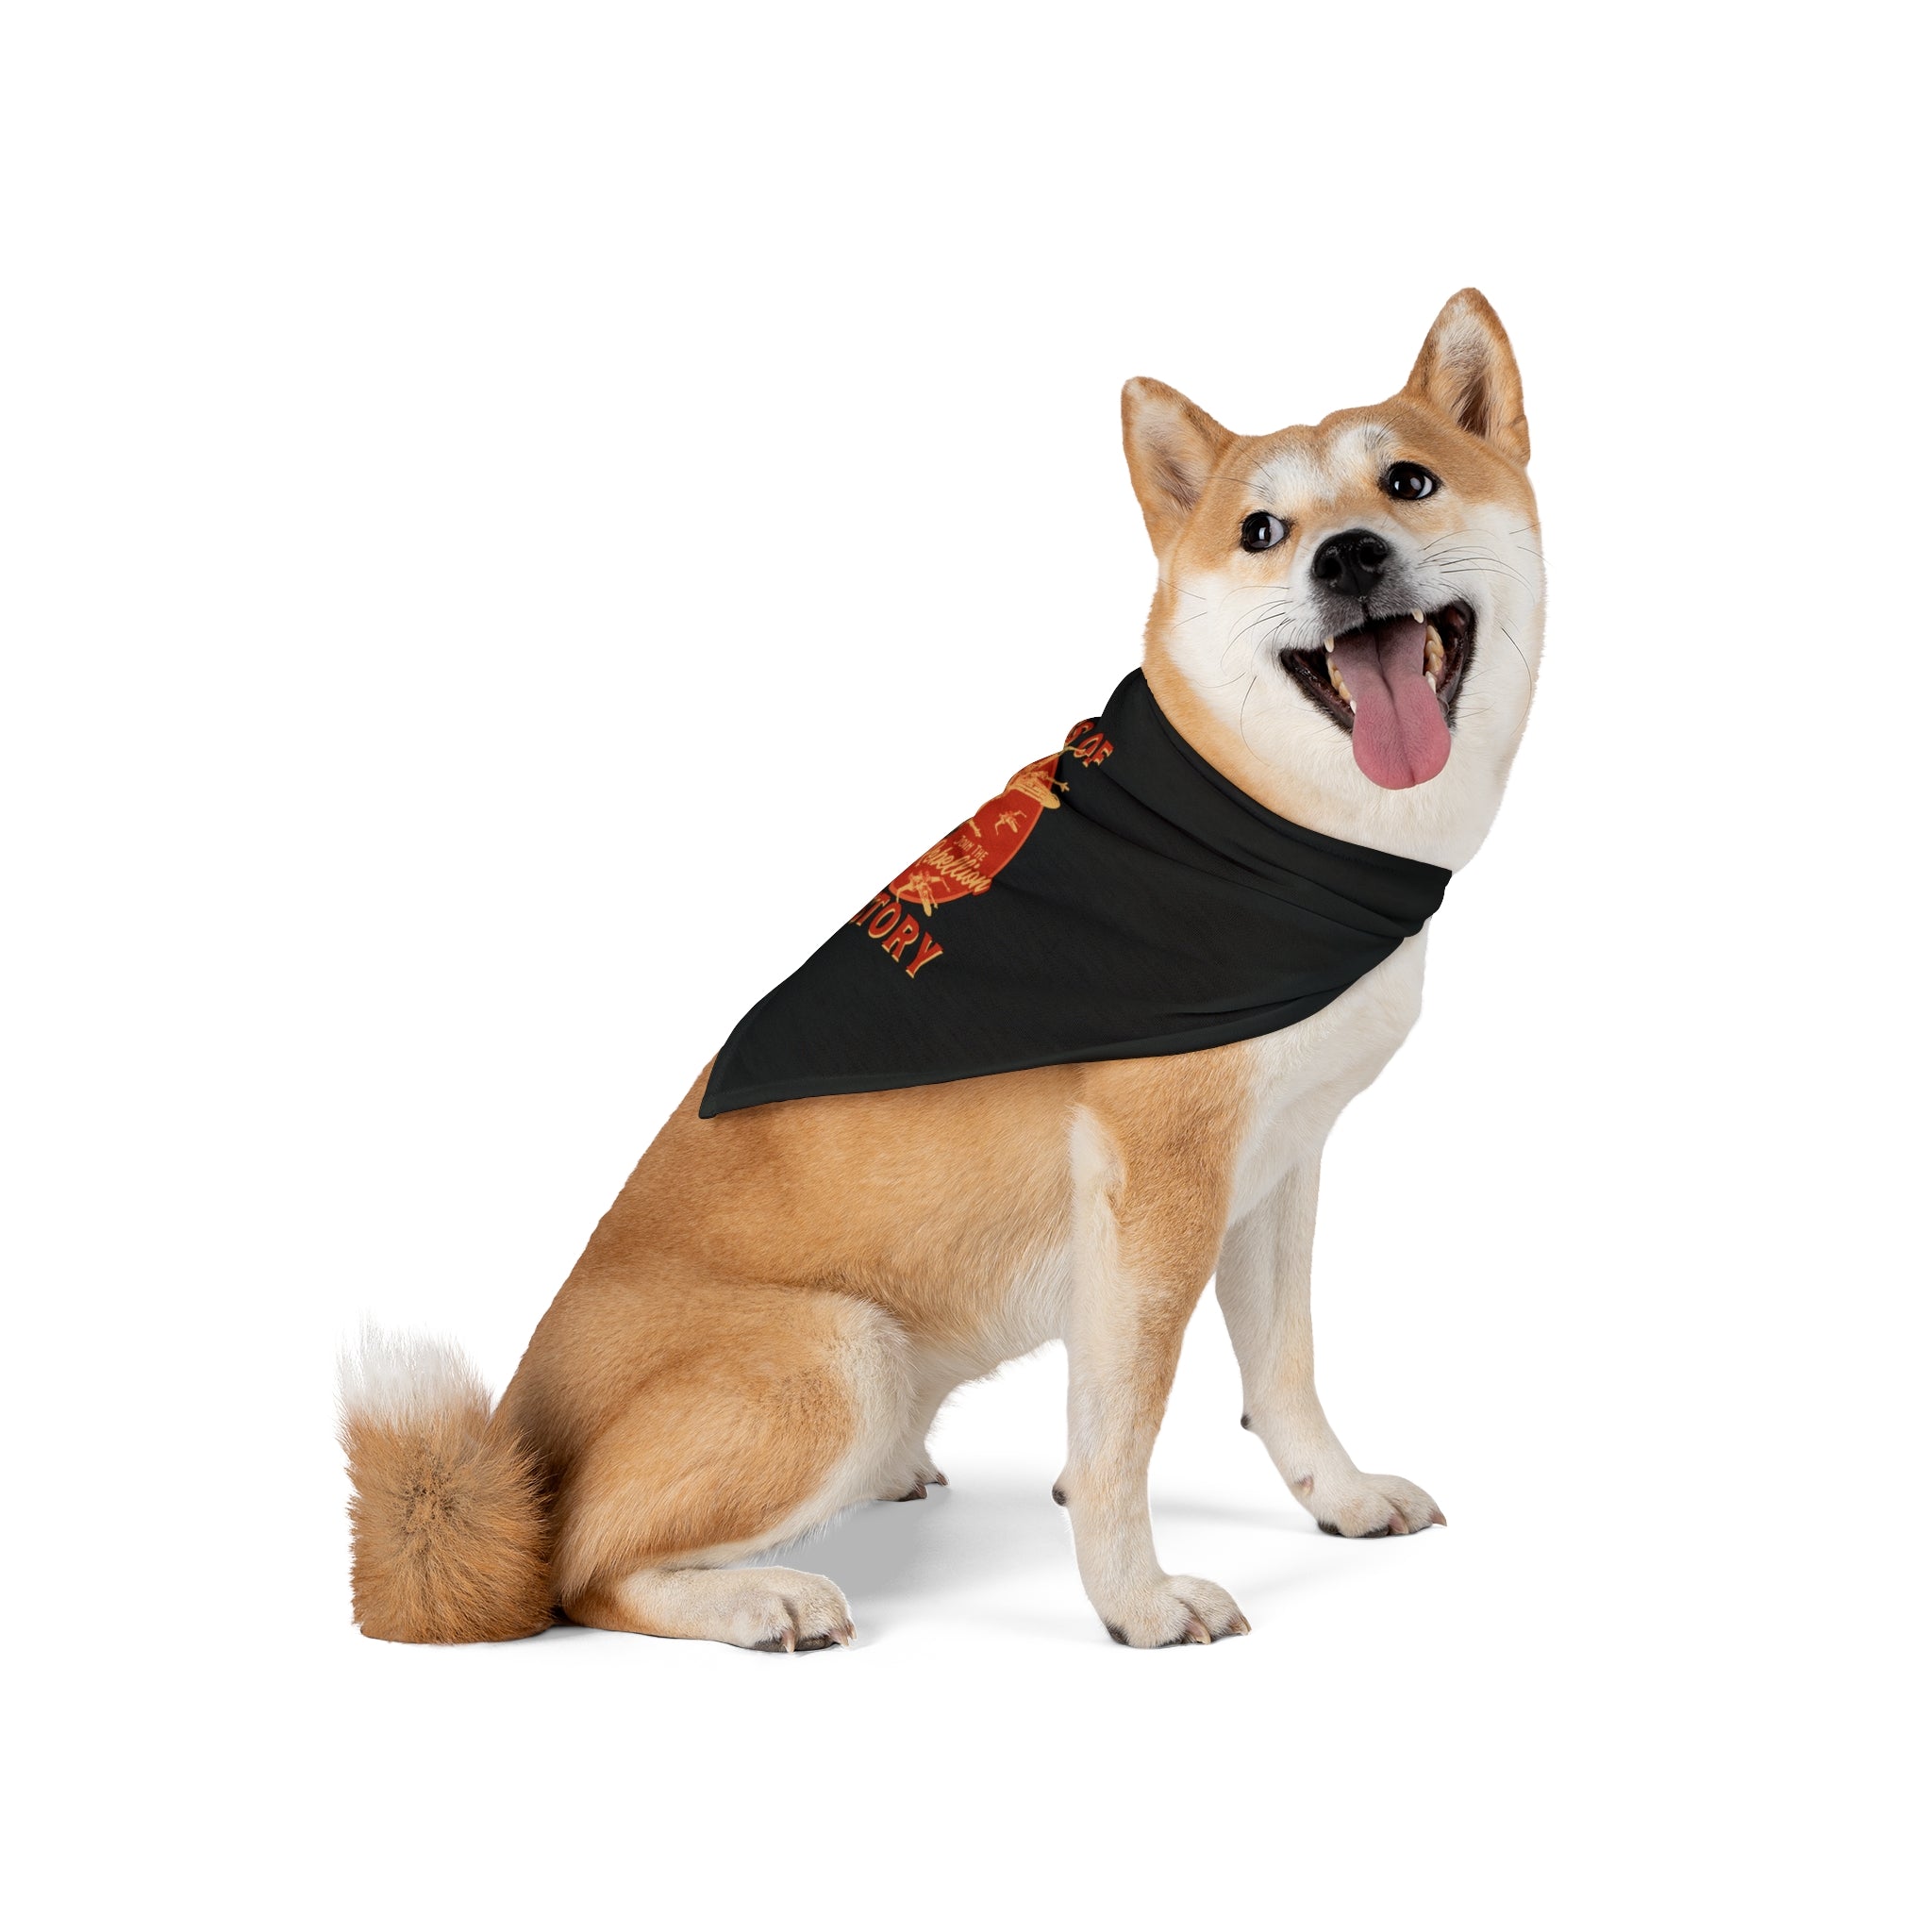 A Shiba Inu dog sits with its tongue out, wearing a black bandana made from soft-spun polyester. The comfortable Wings of Victory - Pet Bandana ensures the dog feels cozy as it looks towards the camera.